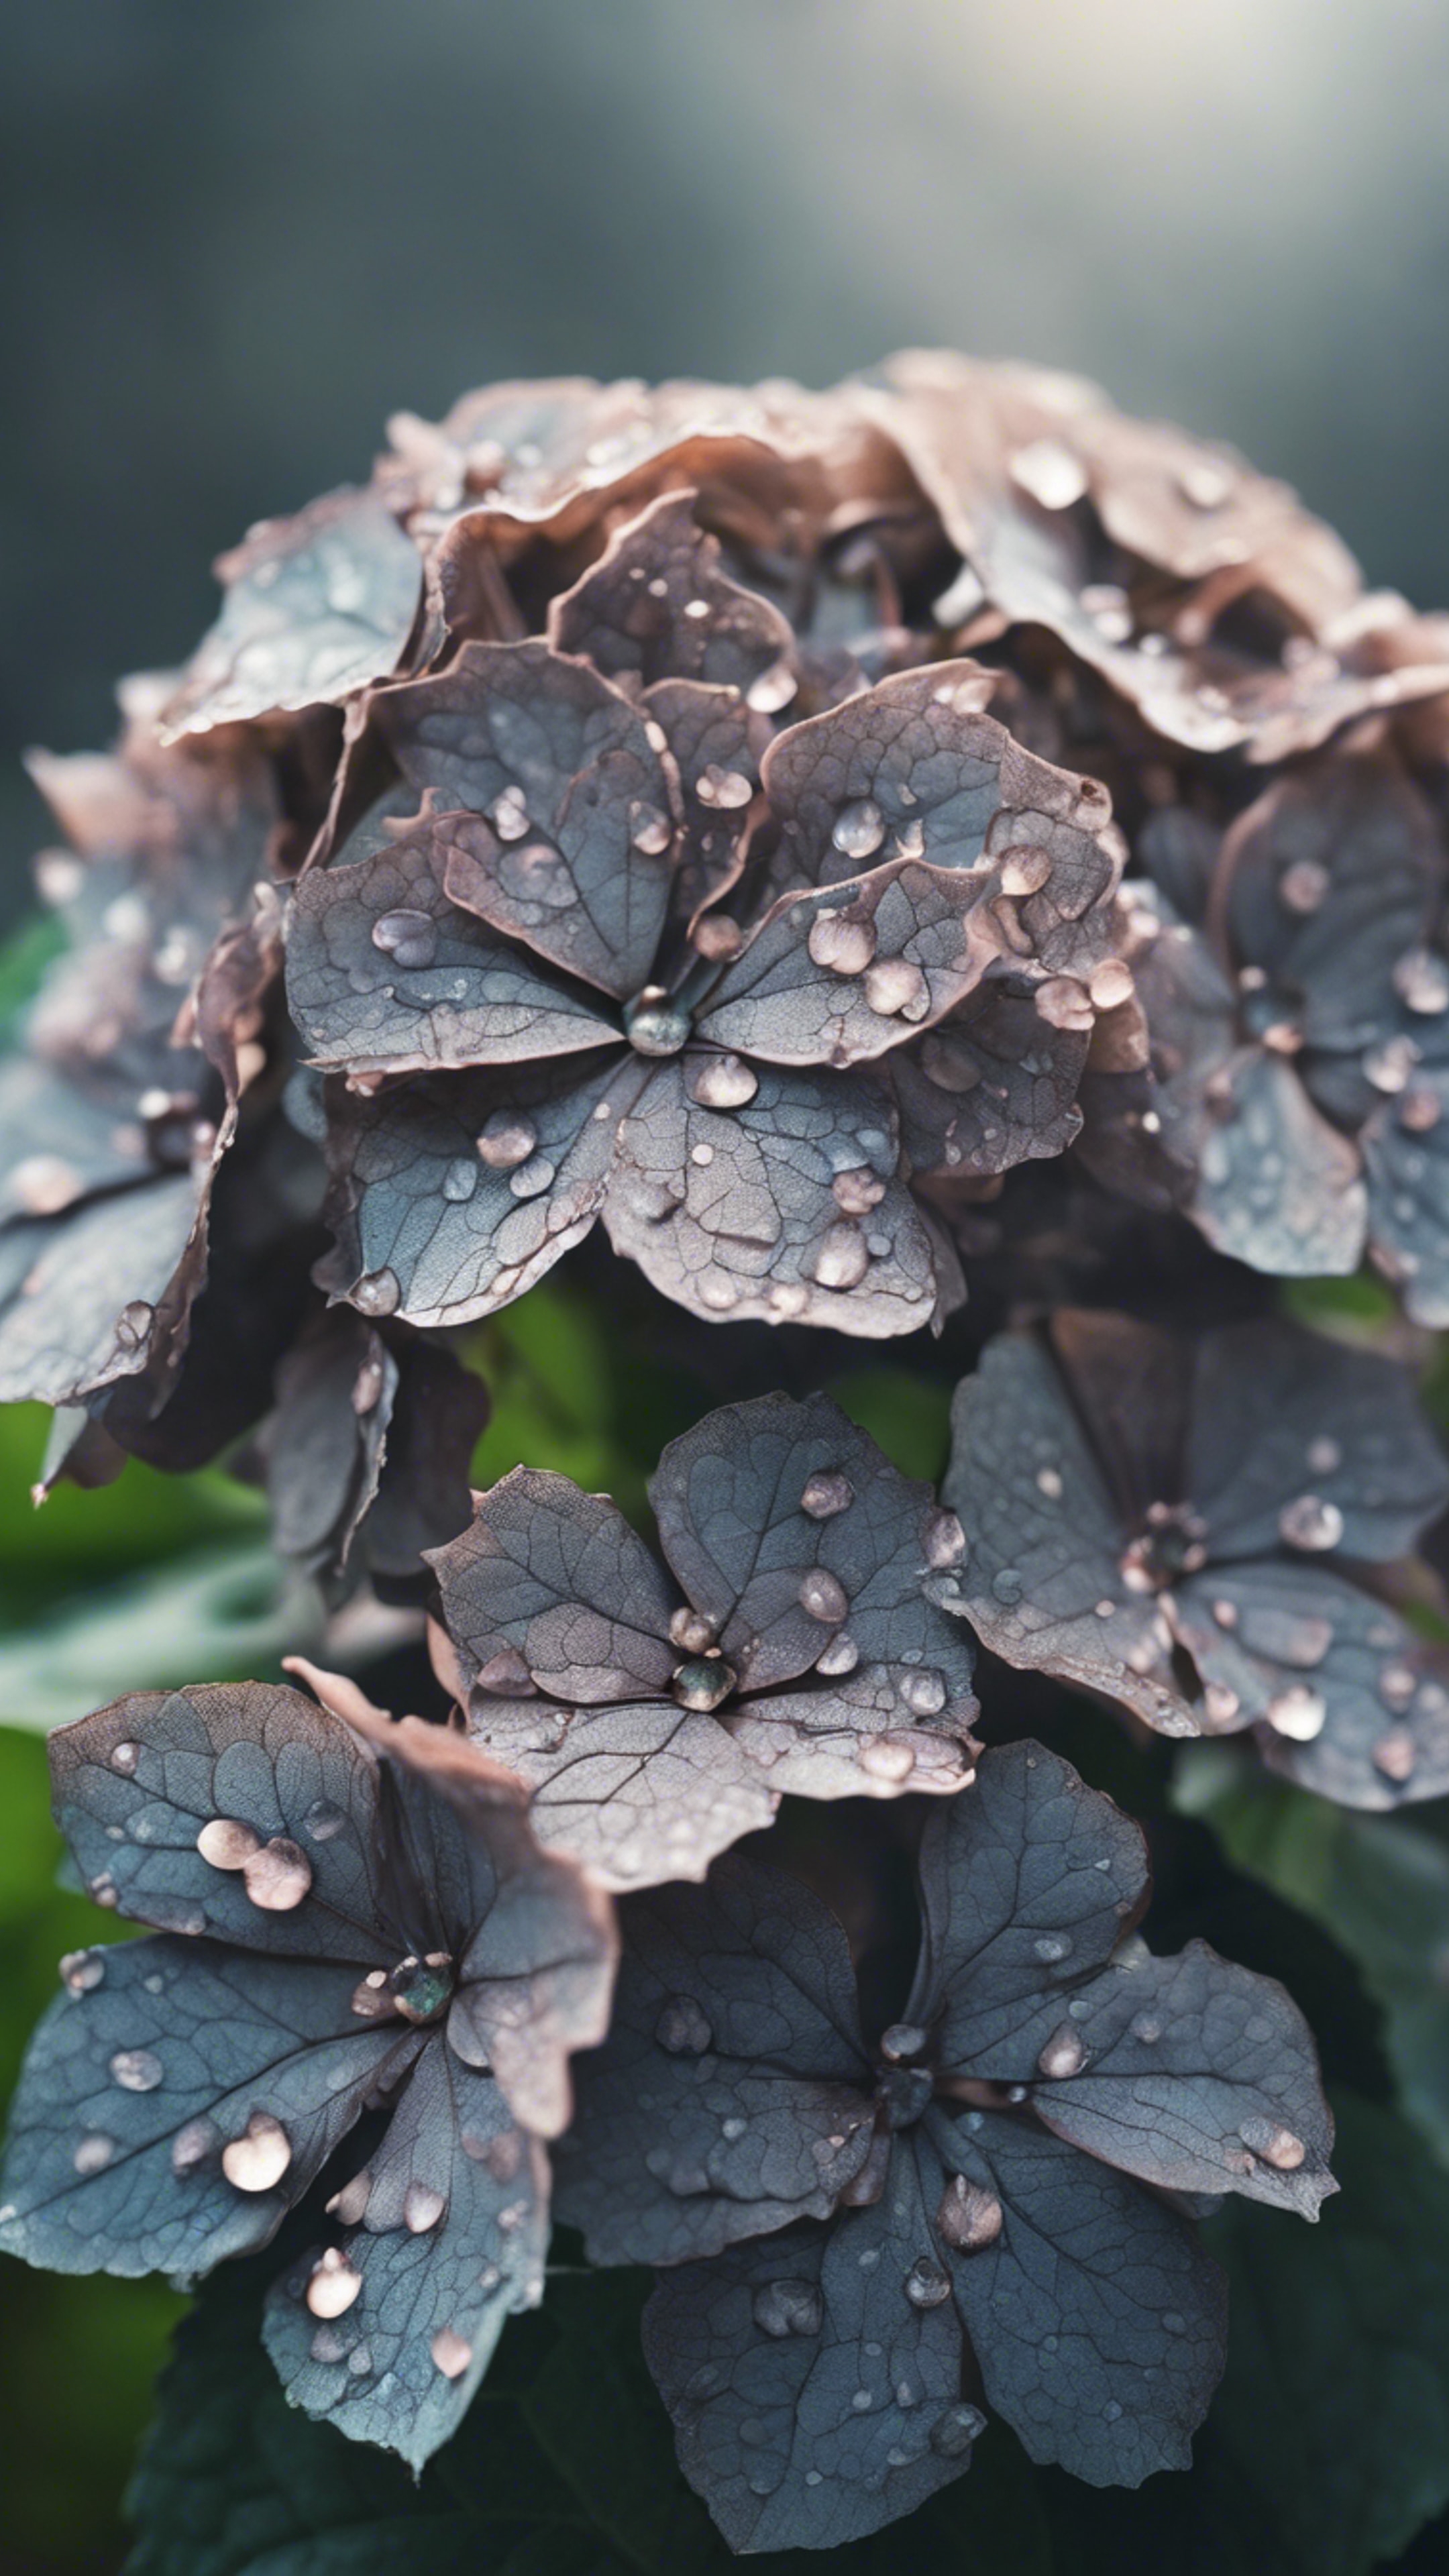 Macro shot of a black hydrangea blooming under a misty morning's soft light. Hintergrund[48c9f0a5a43f45be8c3d]